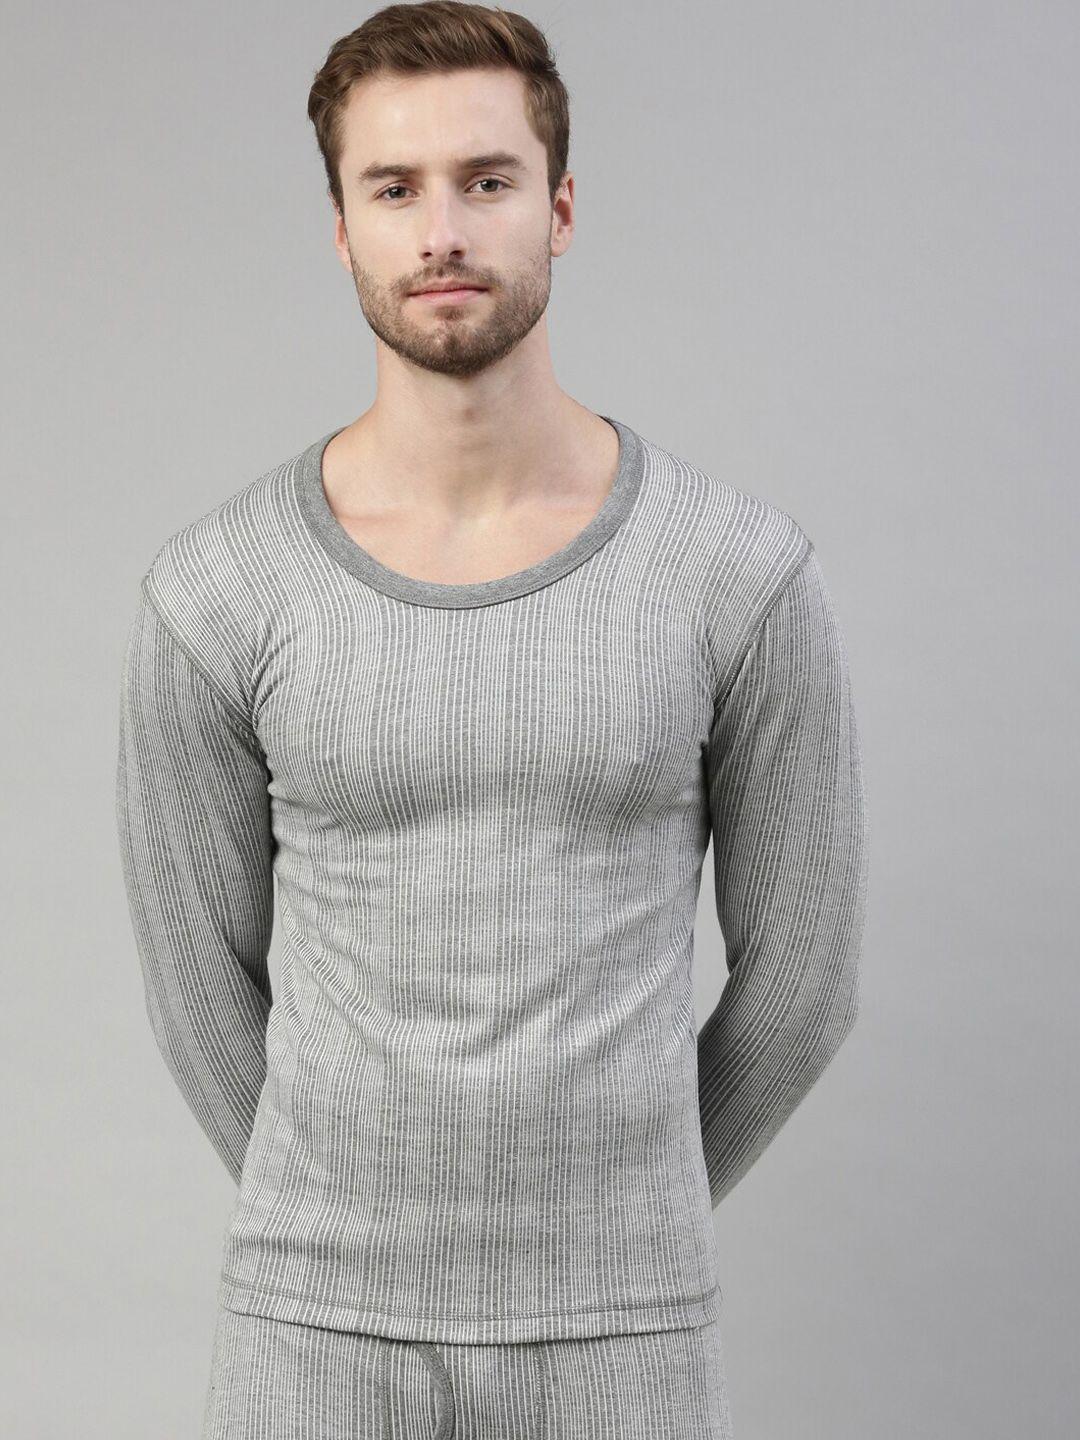 dixcy scott originals 4-way stretch ribbed thermal tops